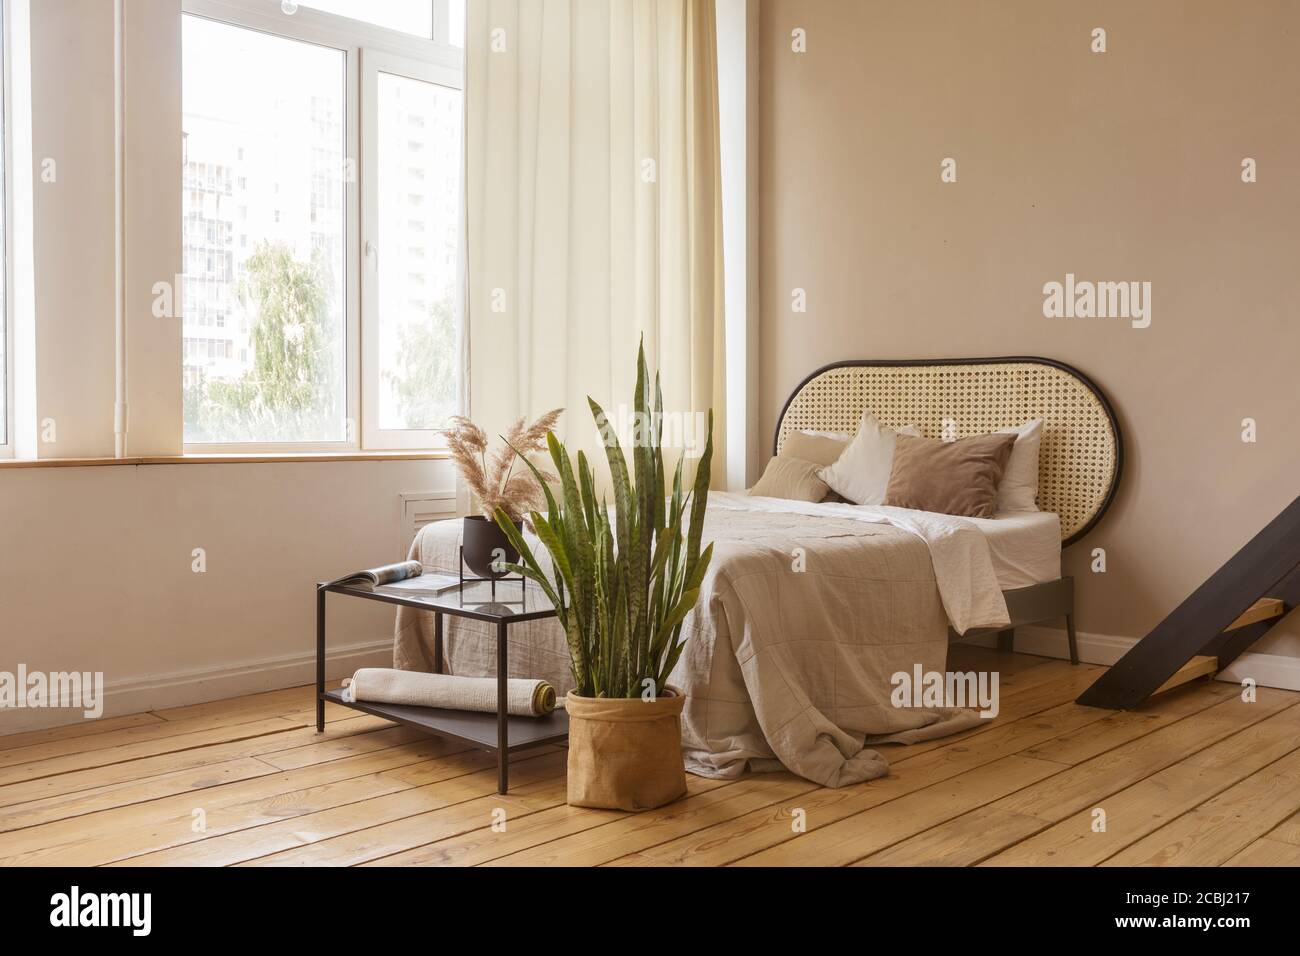 Interior of spacious bedroom at home Stock Photo